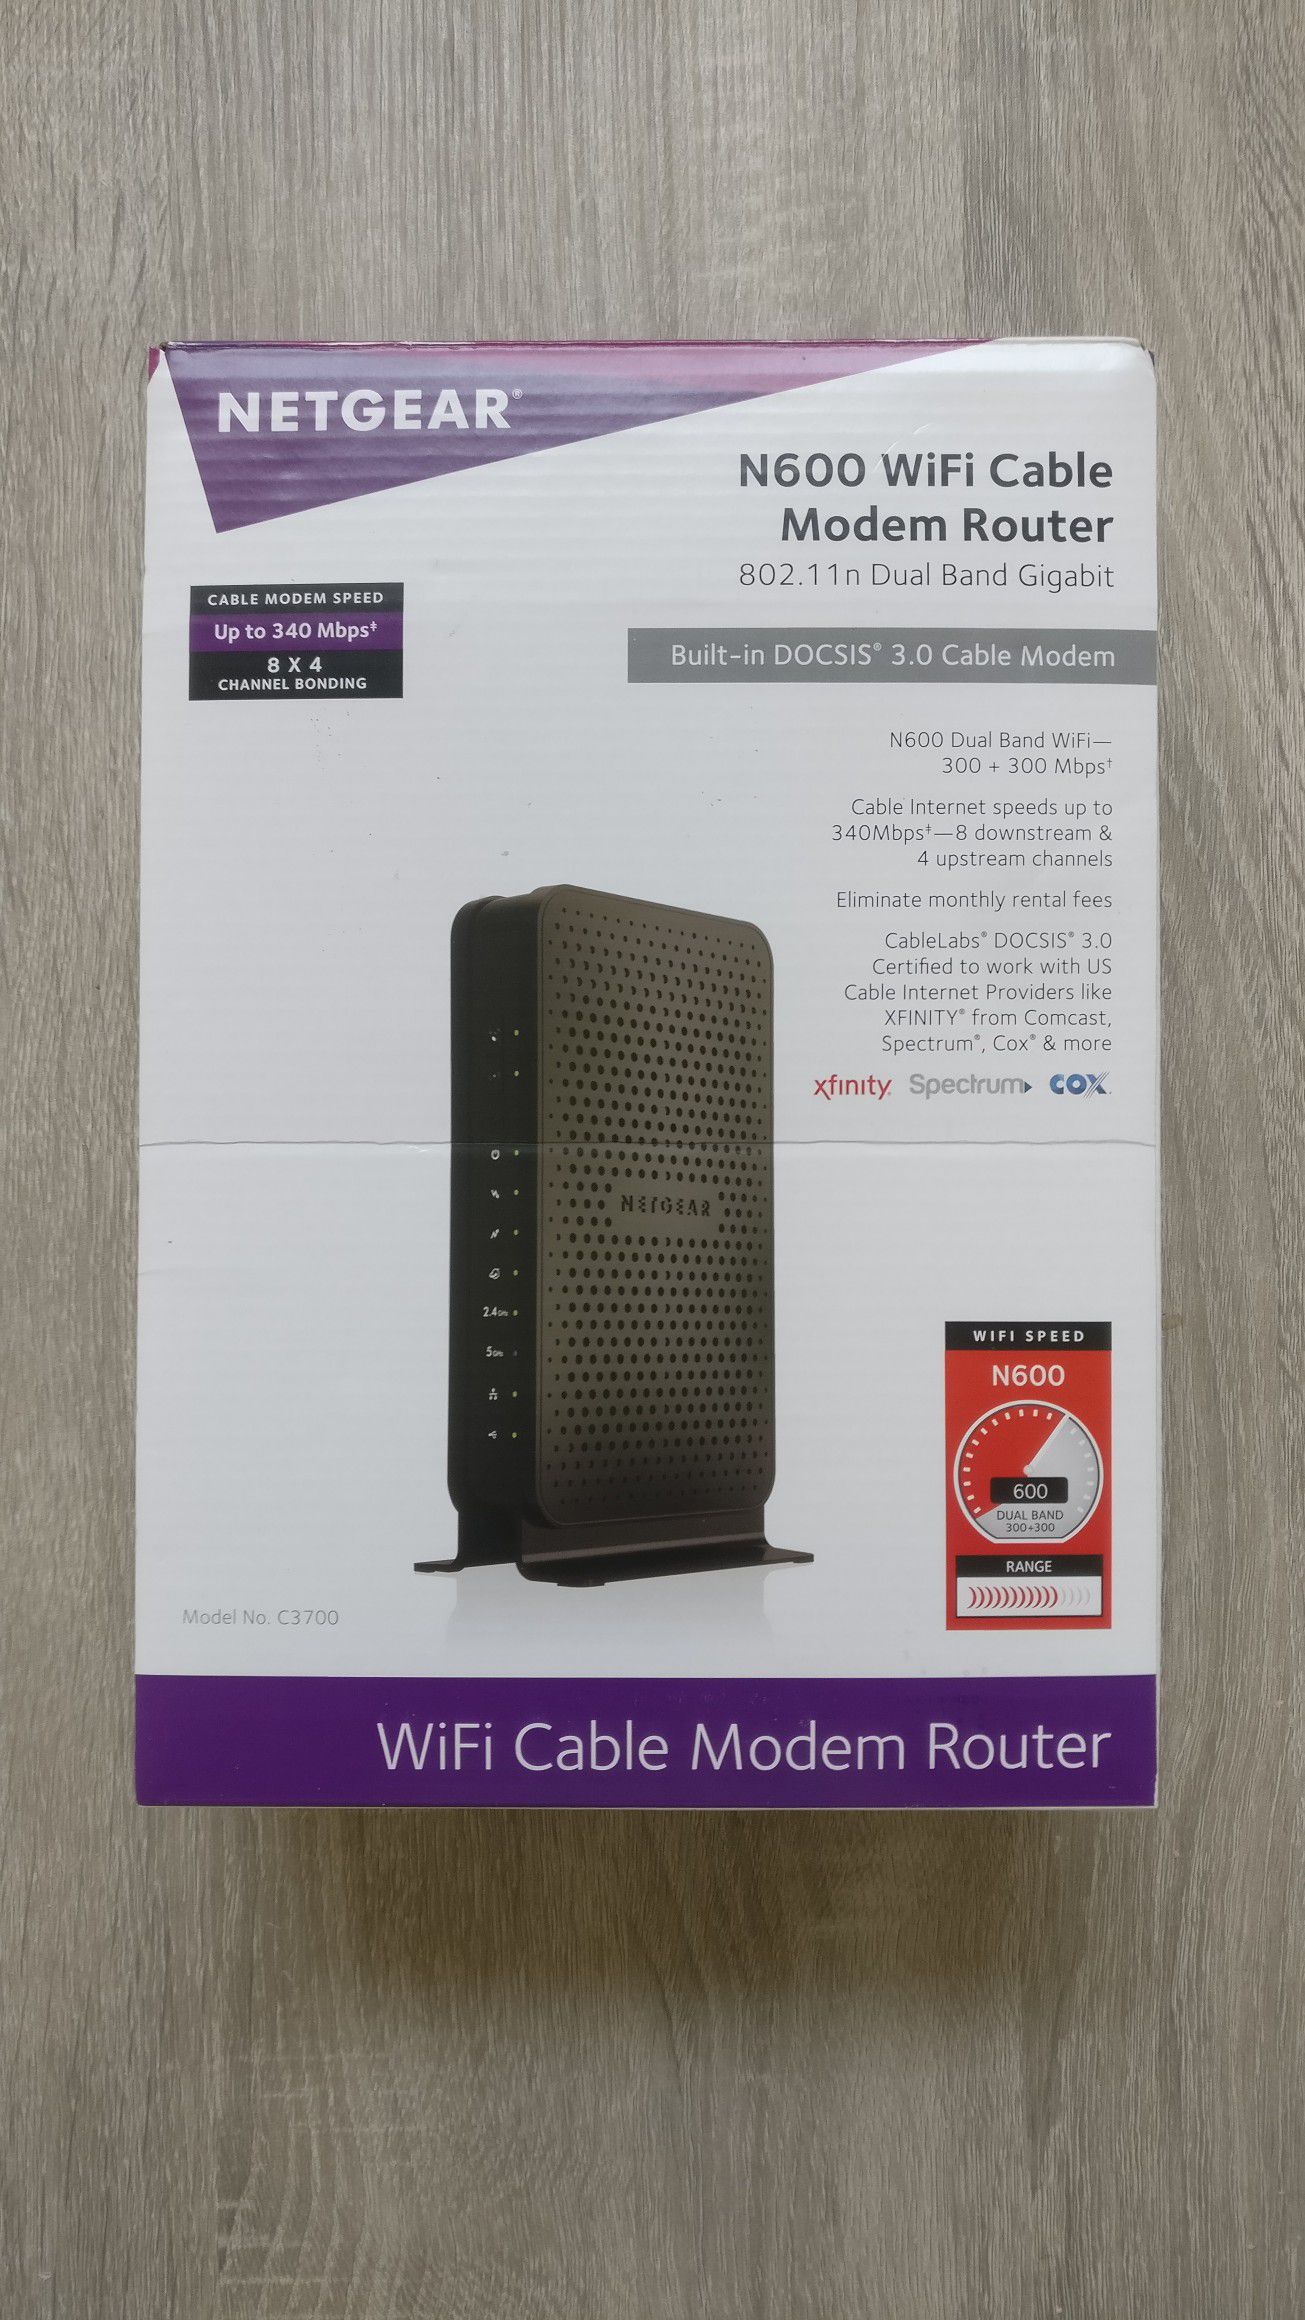 Netgear N600 WiFi Cable Modem Router for Xfinity, Cox, Spectrum